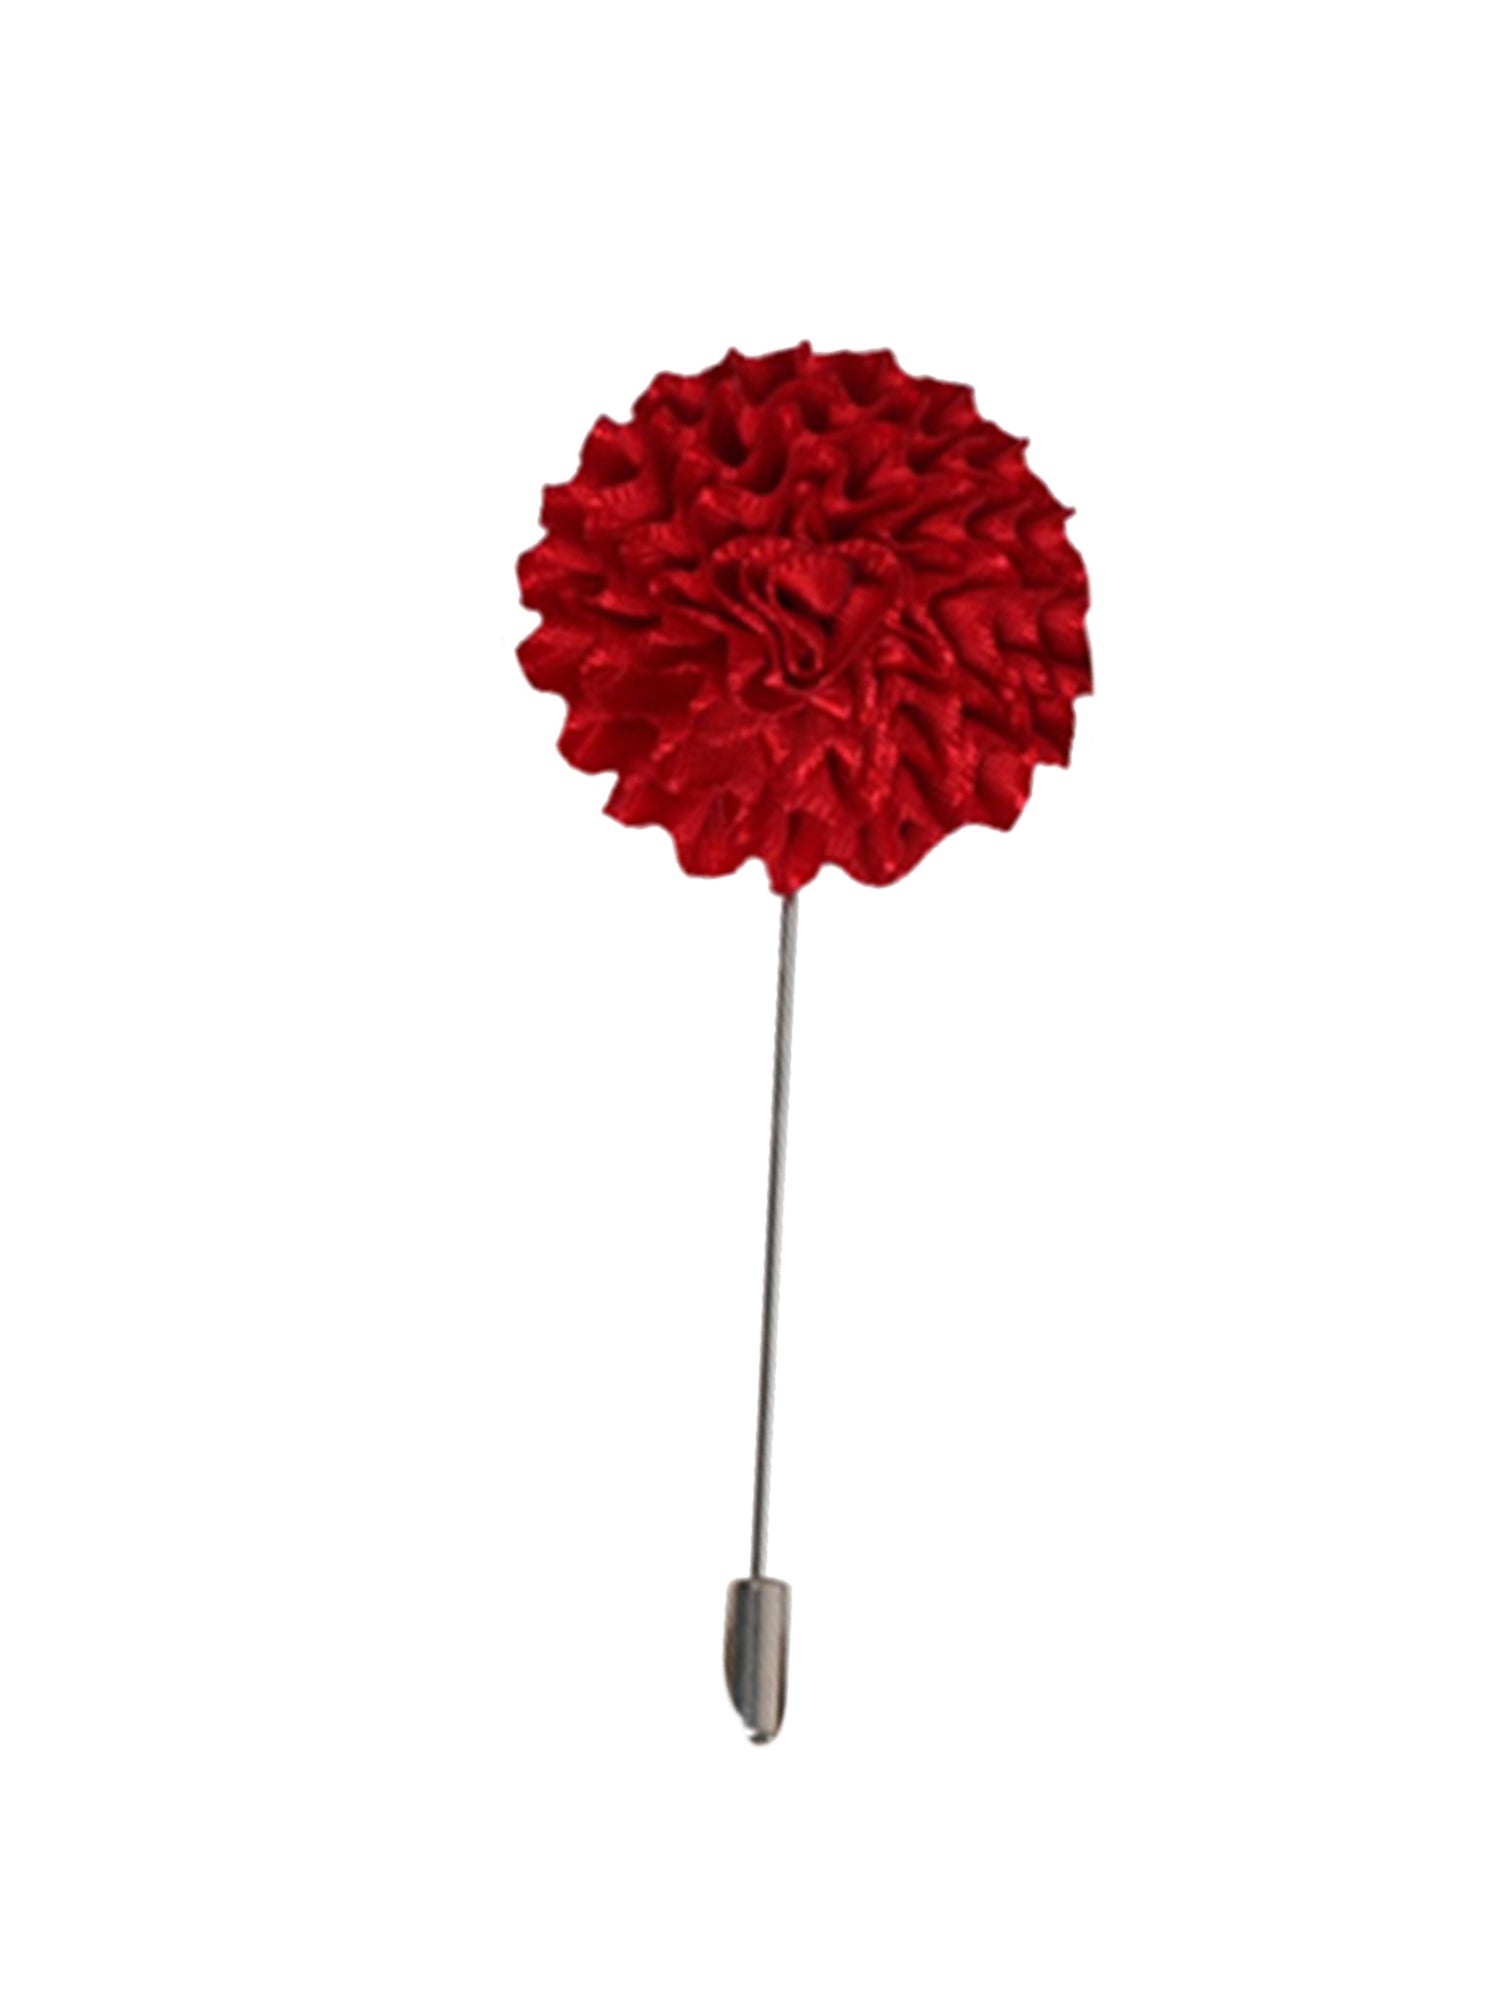 Men's Marigold Flower Lapel Pin Boutonniere For Suit Lapel Price TheDapperTie Red Regular 